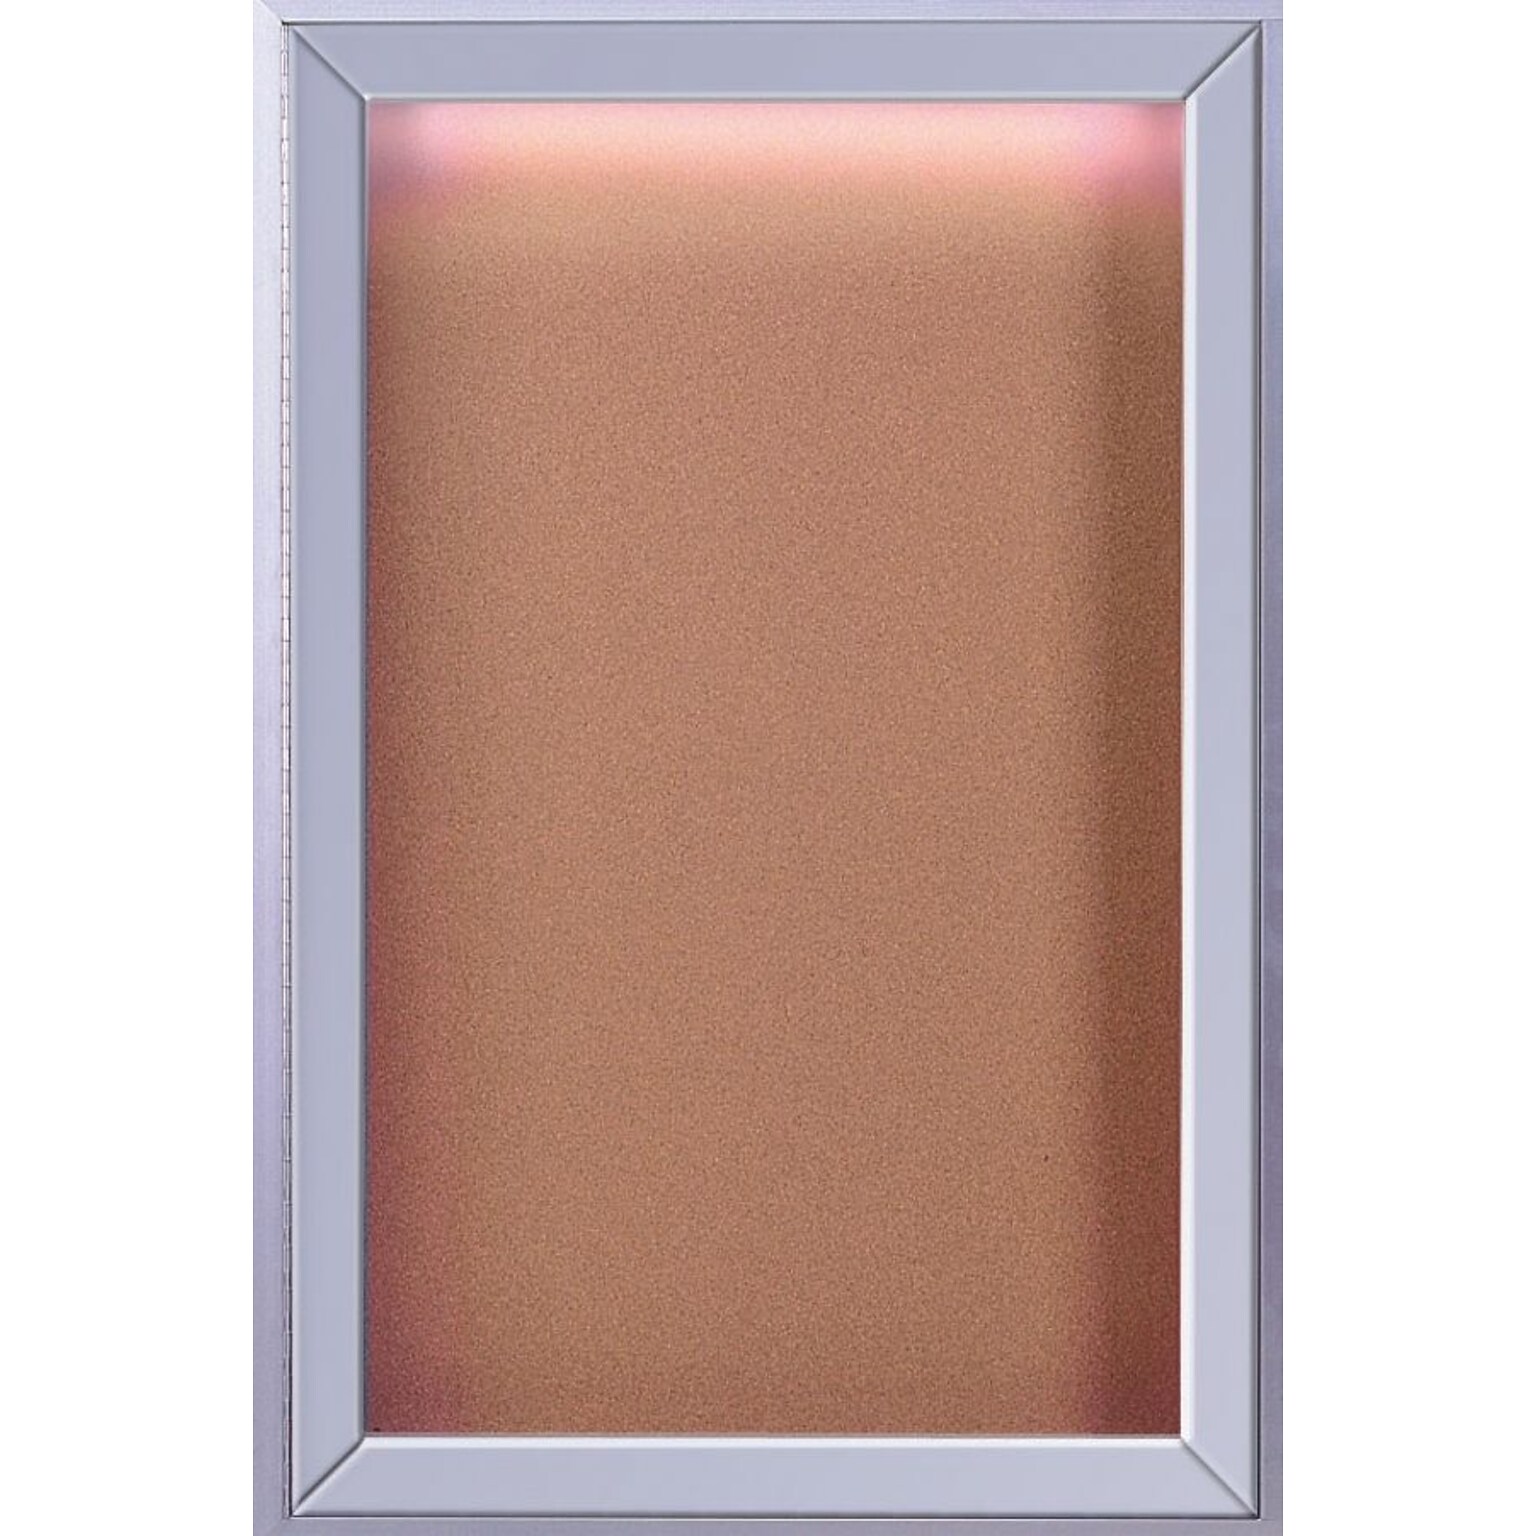 Ghent 1-Door Enclosed Bulletin Board with Concealed Lighting, 36W x 24H (CPA13624K)